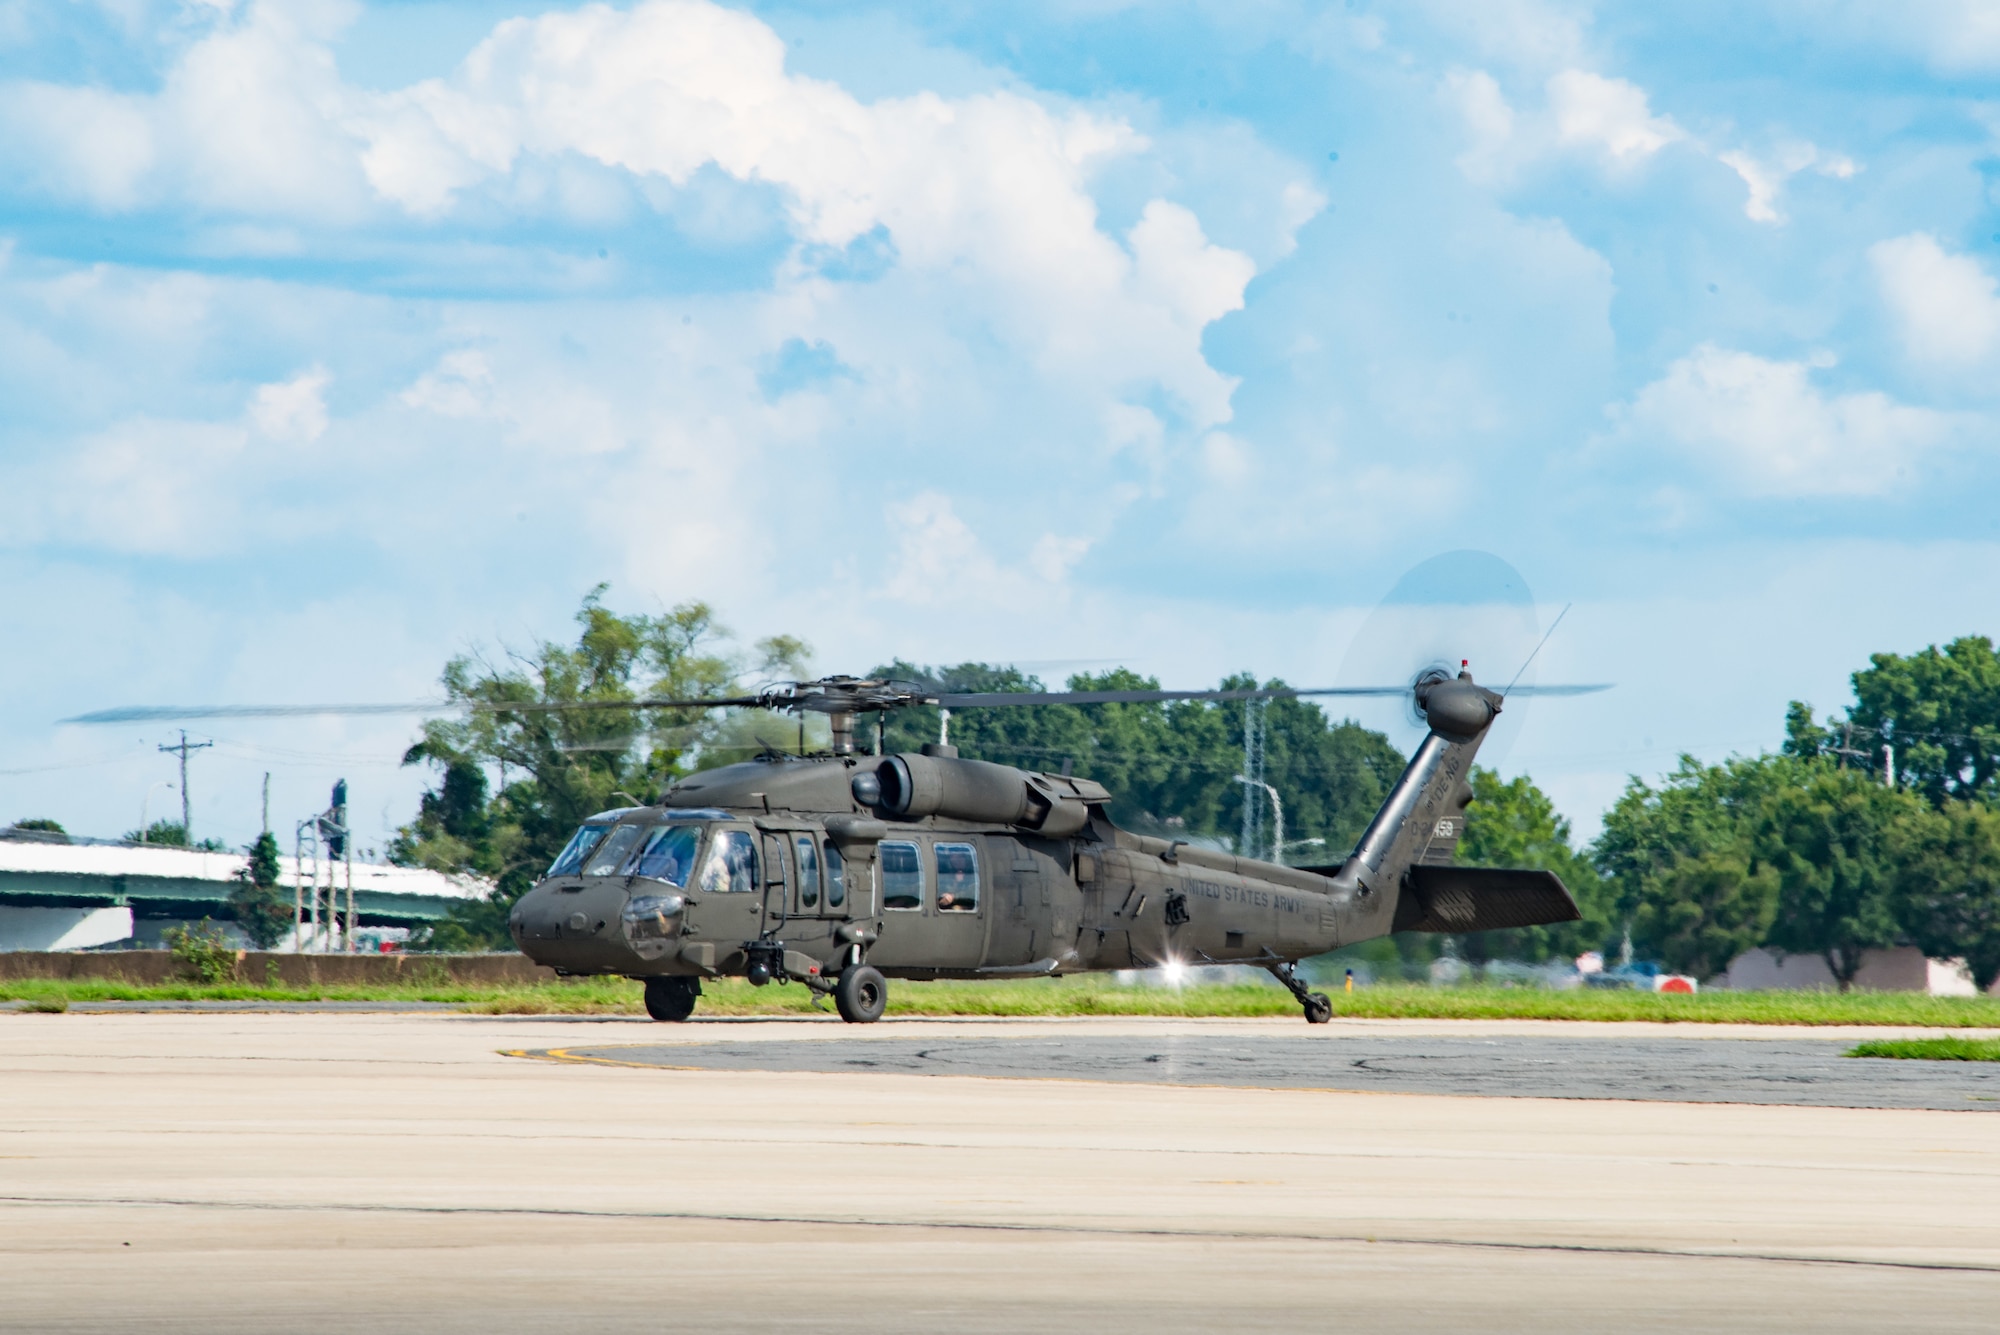 142nd Aeromedical Evacuation Squadron and Delaware National Guard aviation perform joint exercise